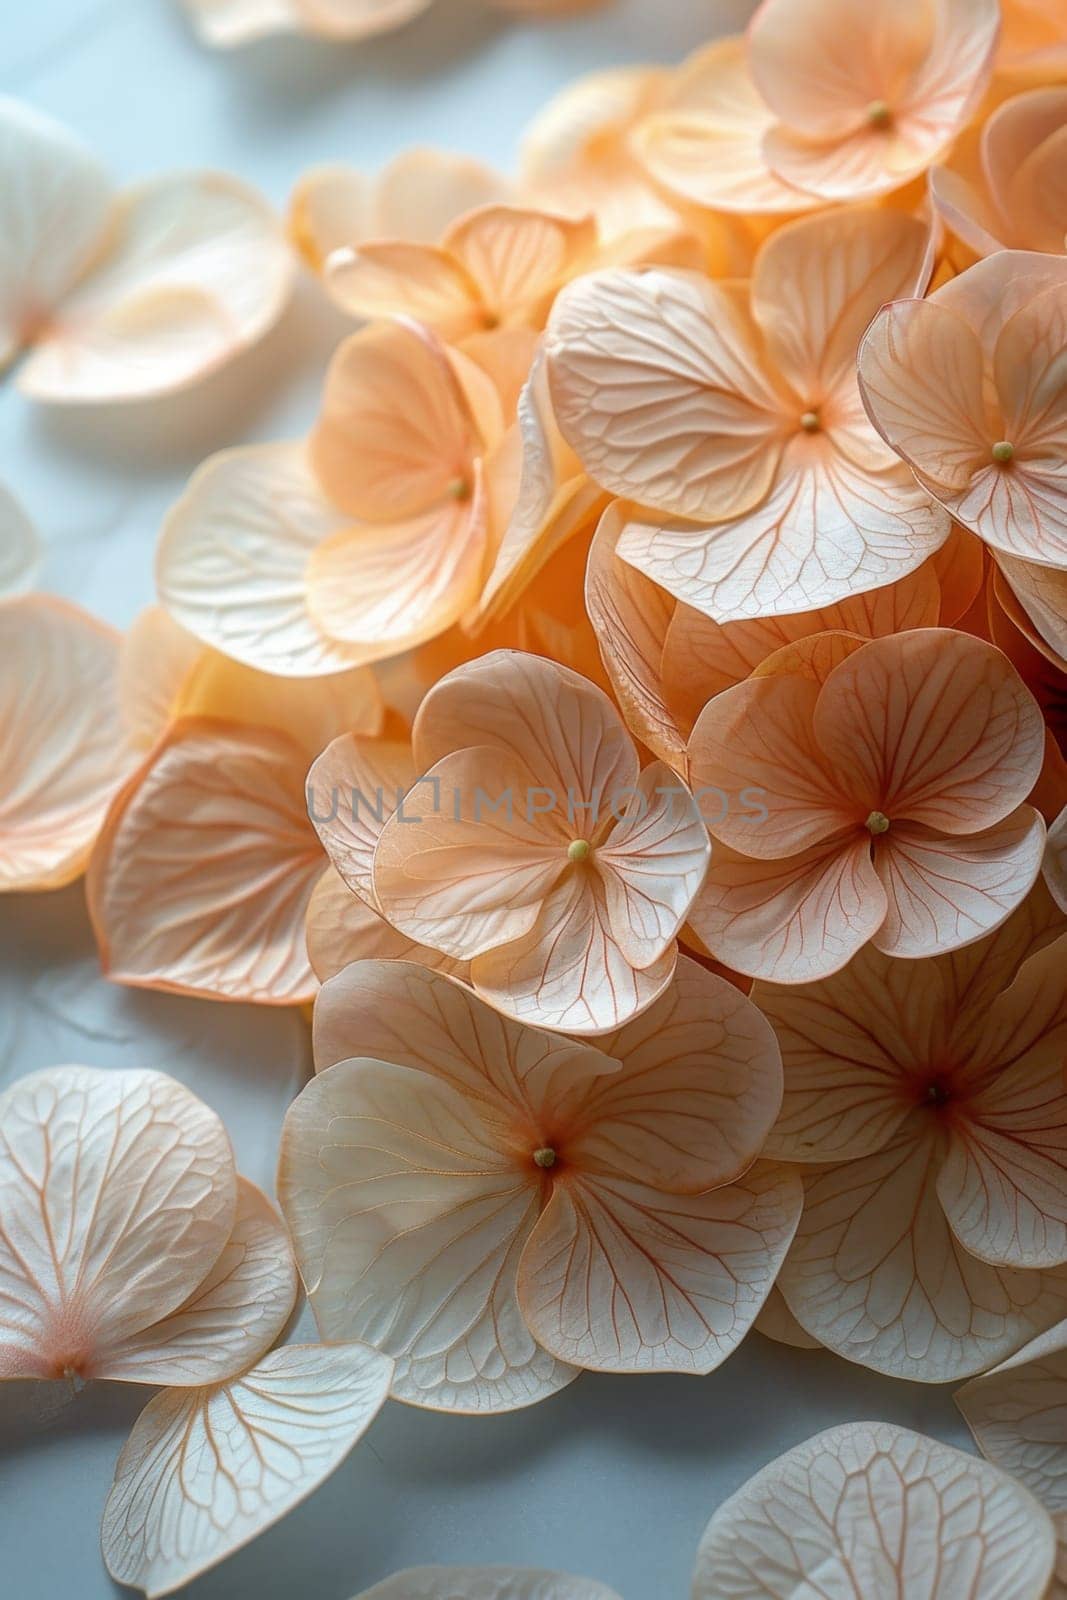 Abstract floral pattern of petals. Delicate background colors of flower petals by Lobachad